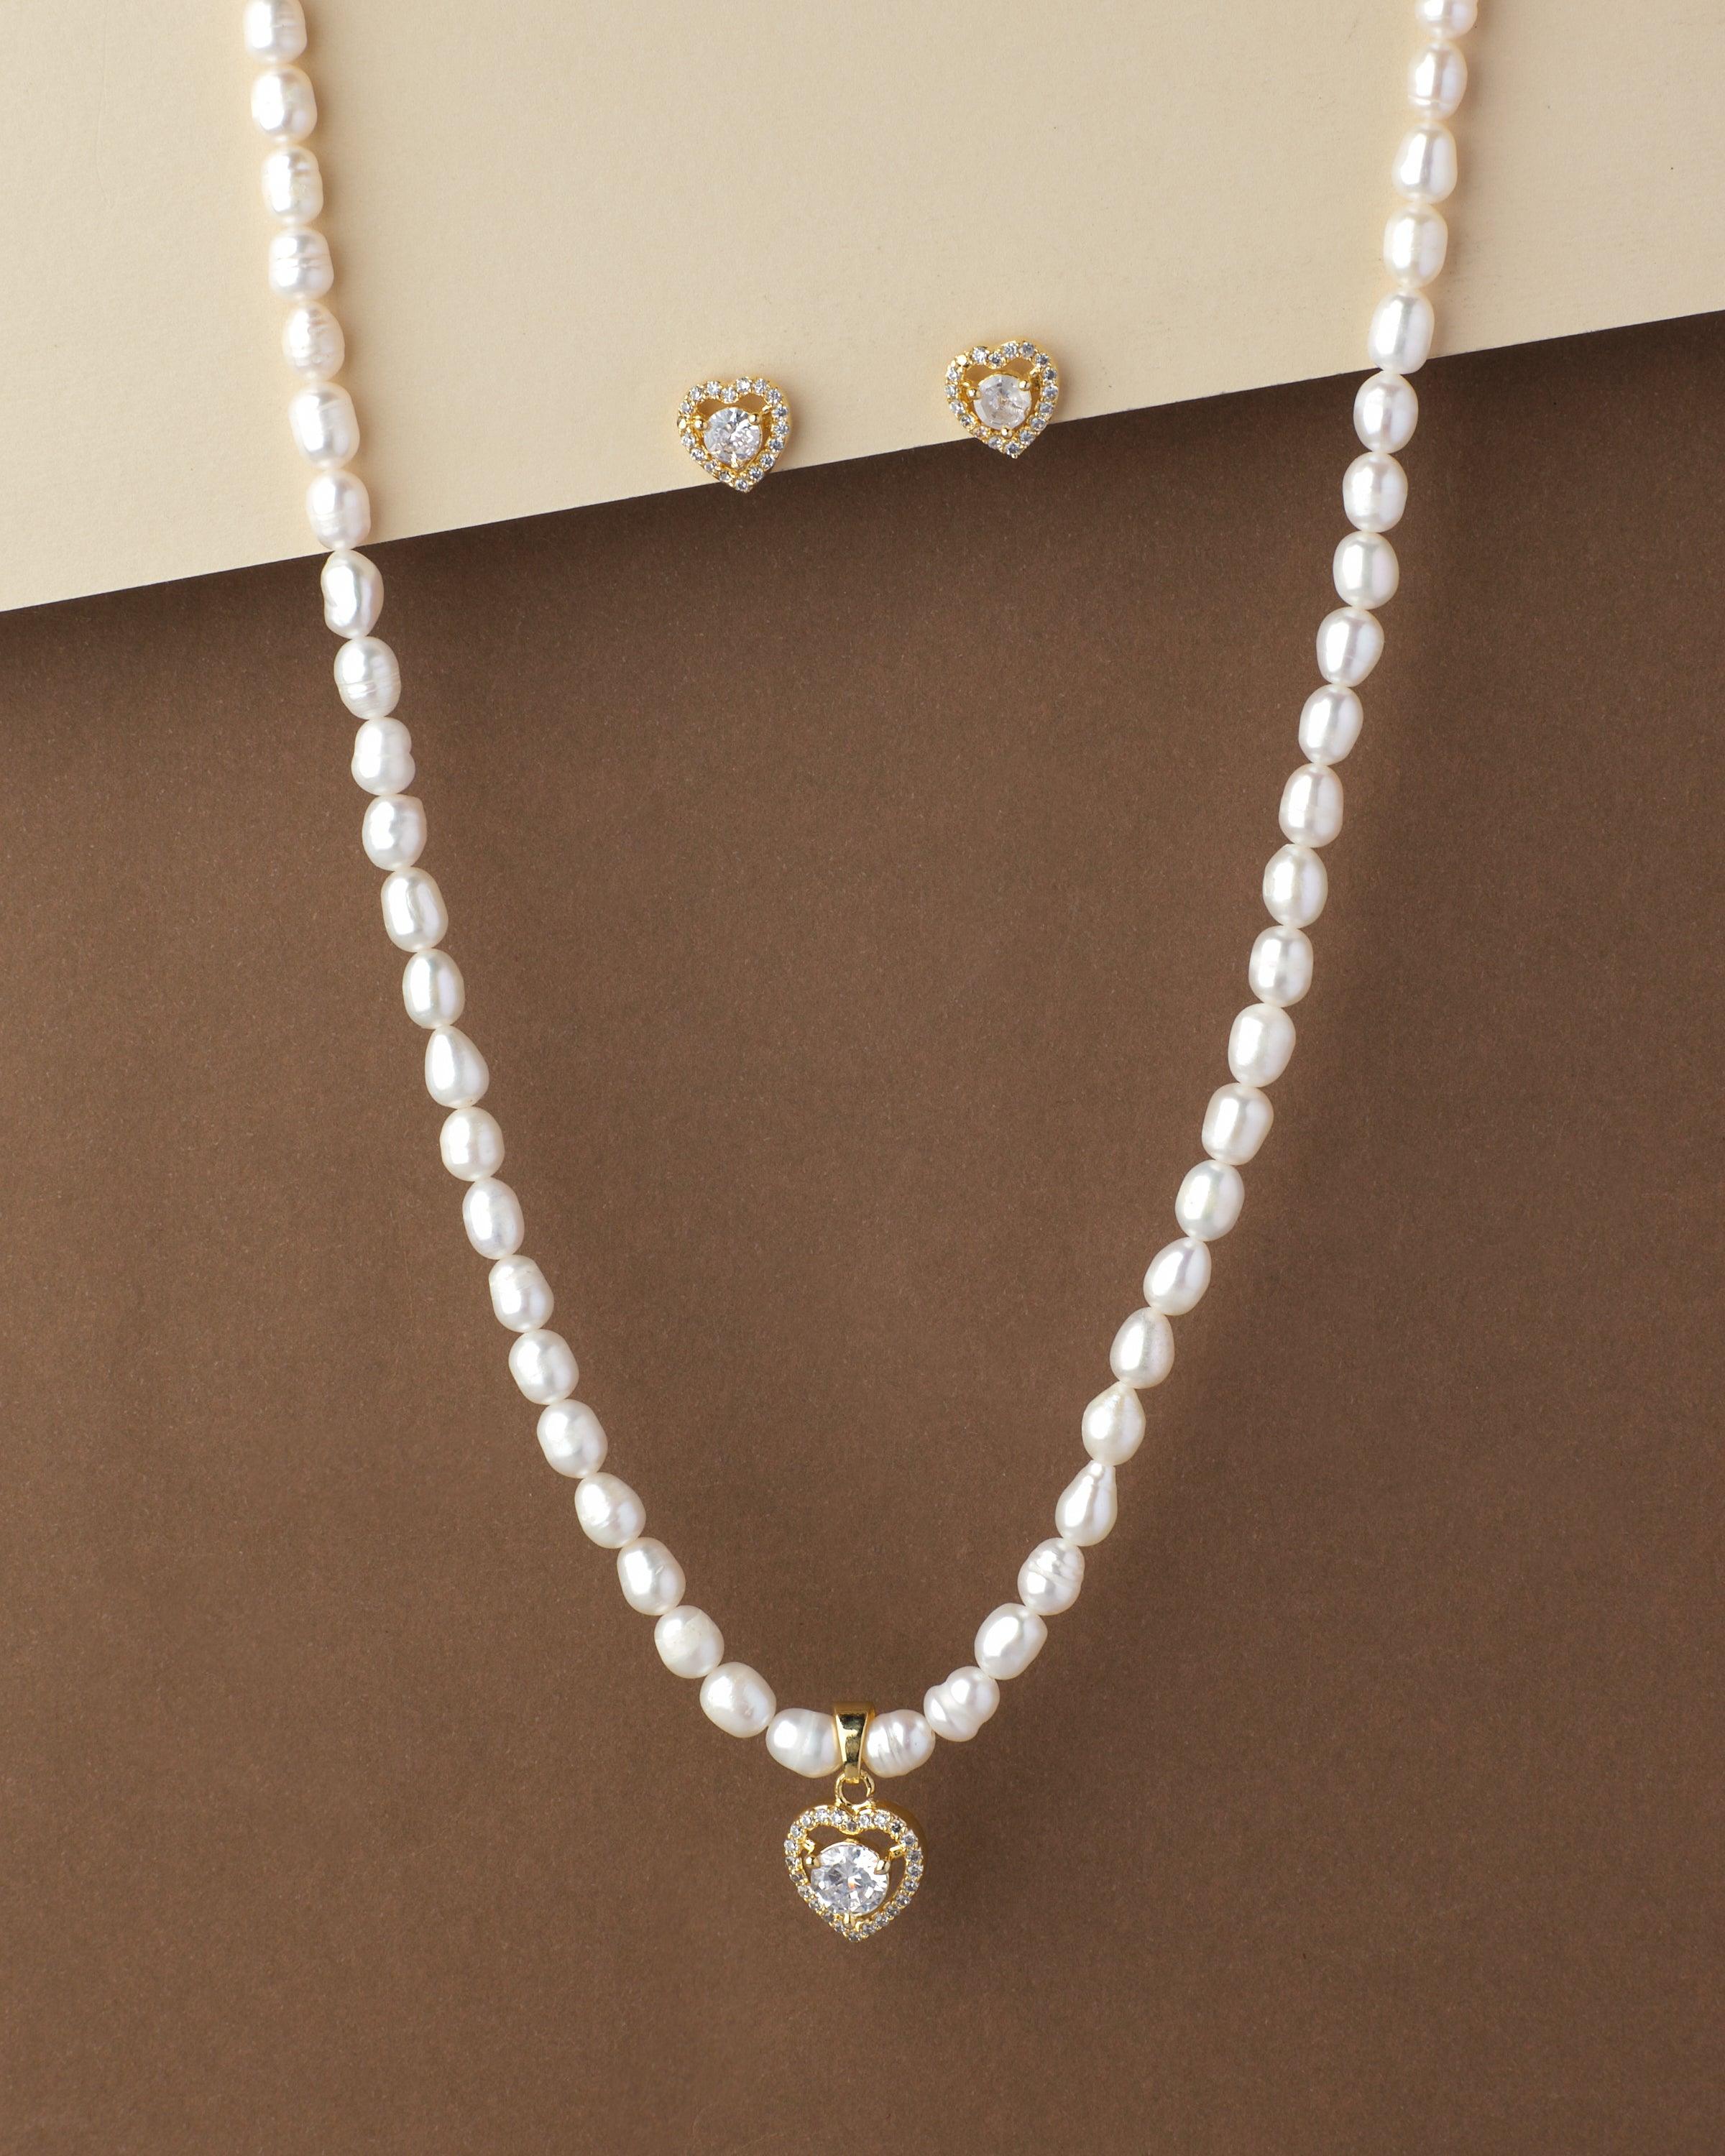 Pearl necklace with pink glitter heart